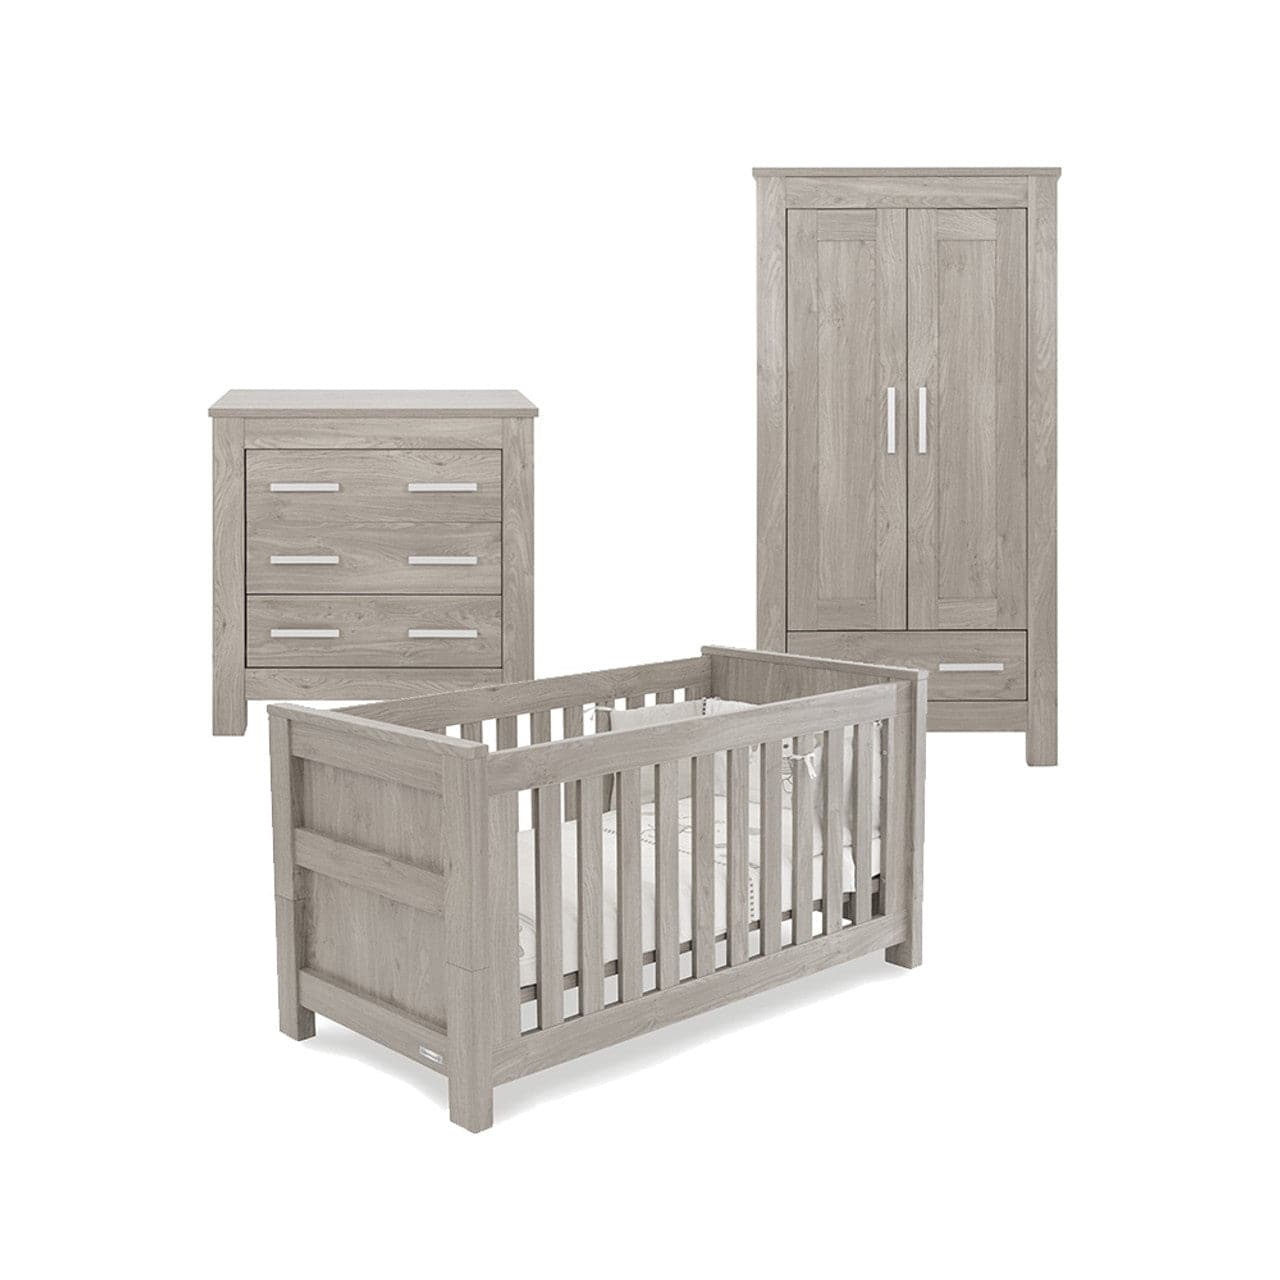 Babystyle Bordeaux Ash Furniture + FREE Sprung Mattress - 3 Piece Room Set -  | For Your Little One